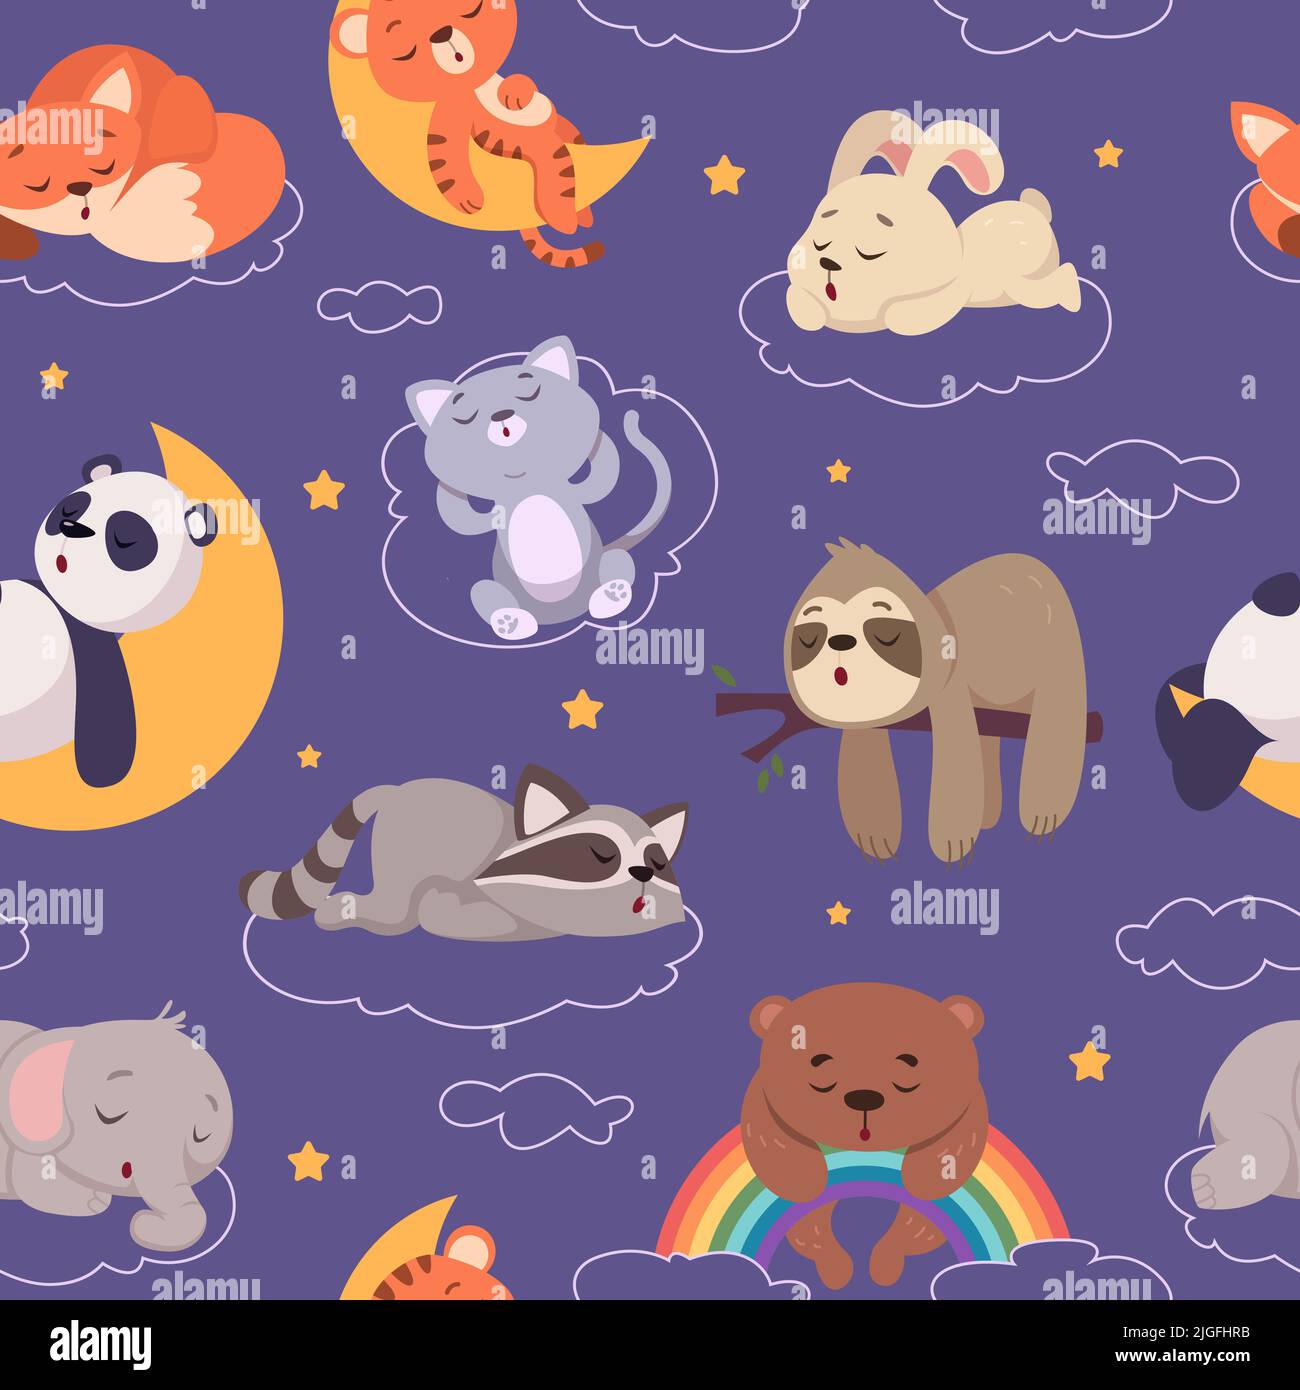 Sleeping animals pattern. Wild funny night animals in relaxes poses exact vector seamless cartoon background asleep characters Stock Vector